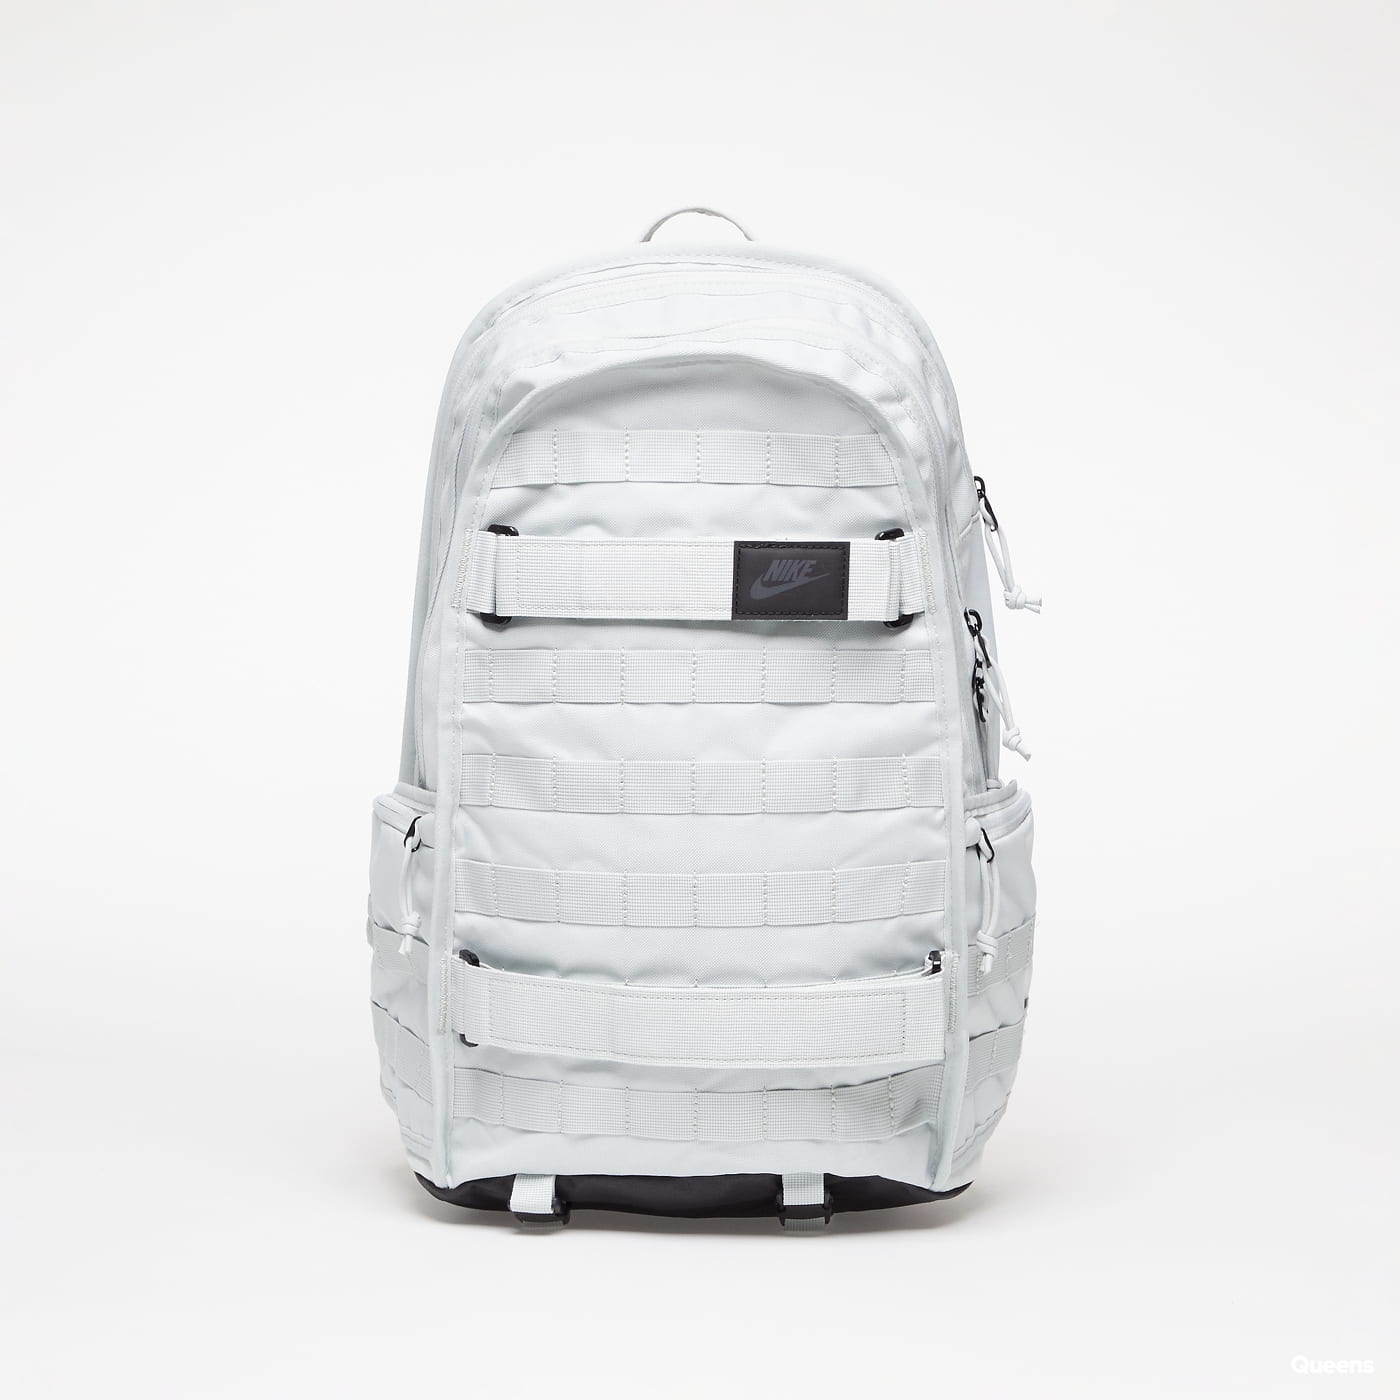 RPM BACKPACK LIGHT SILVER